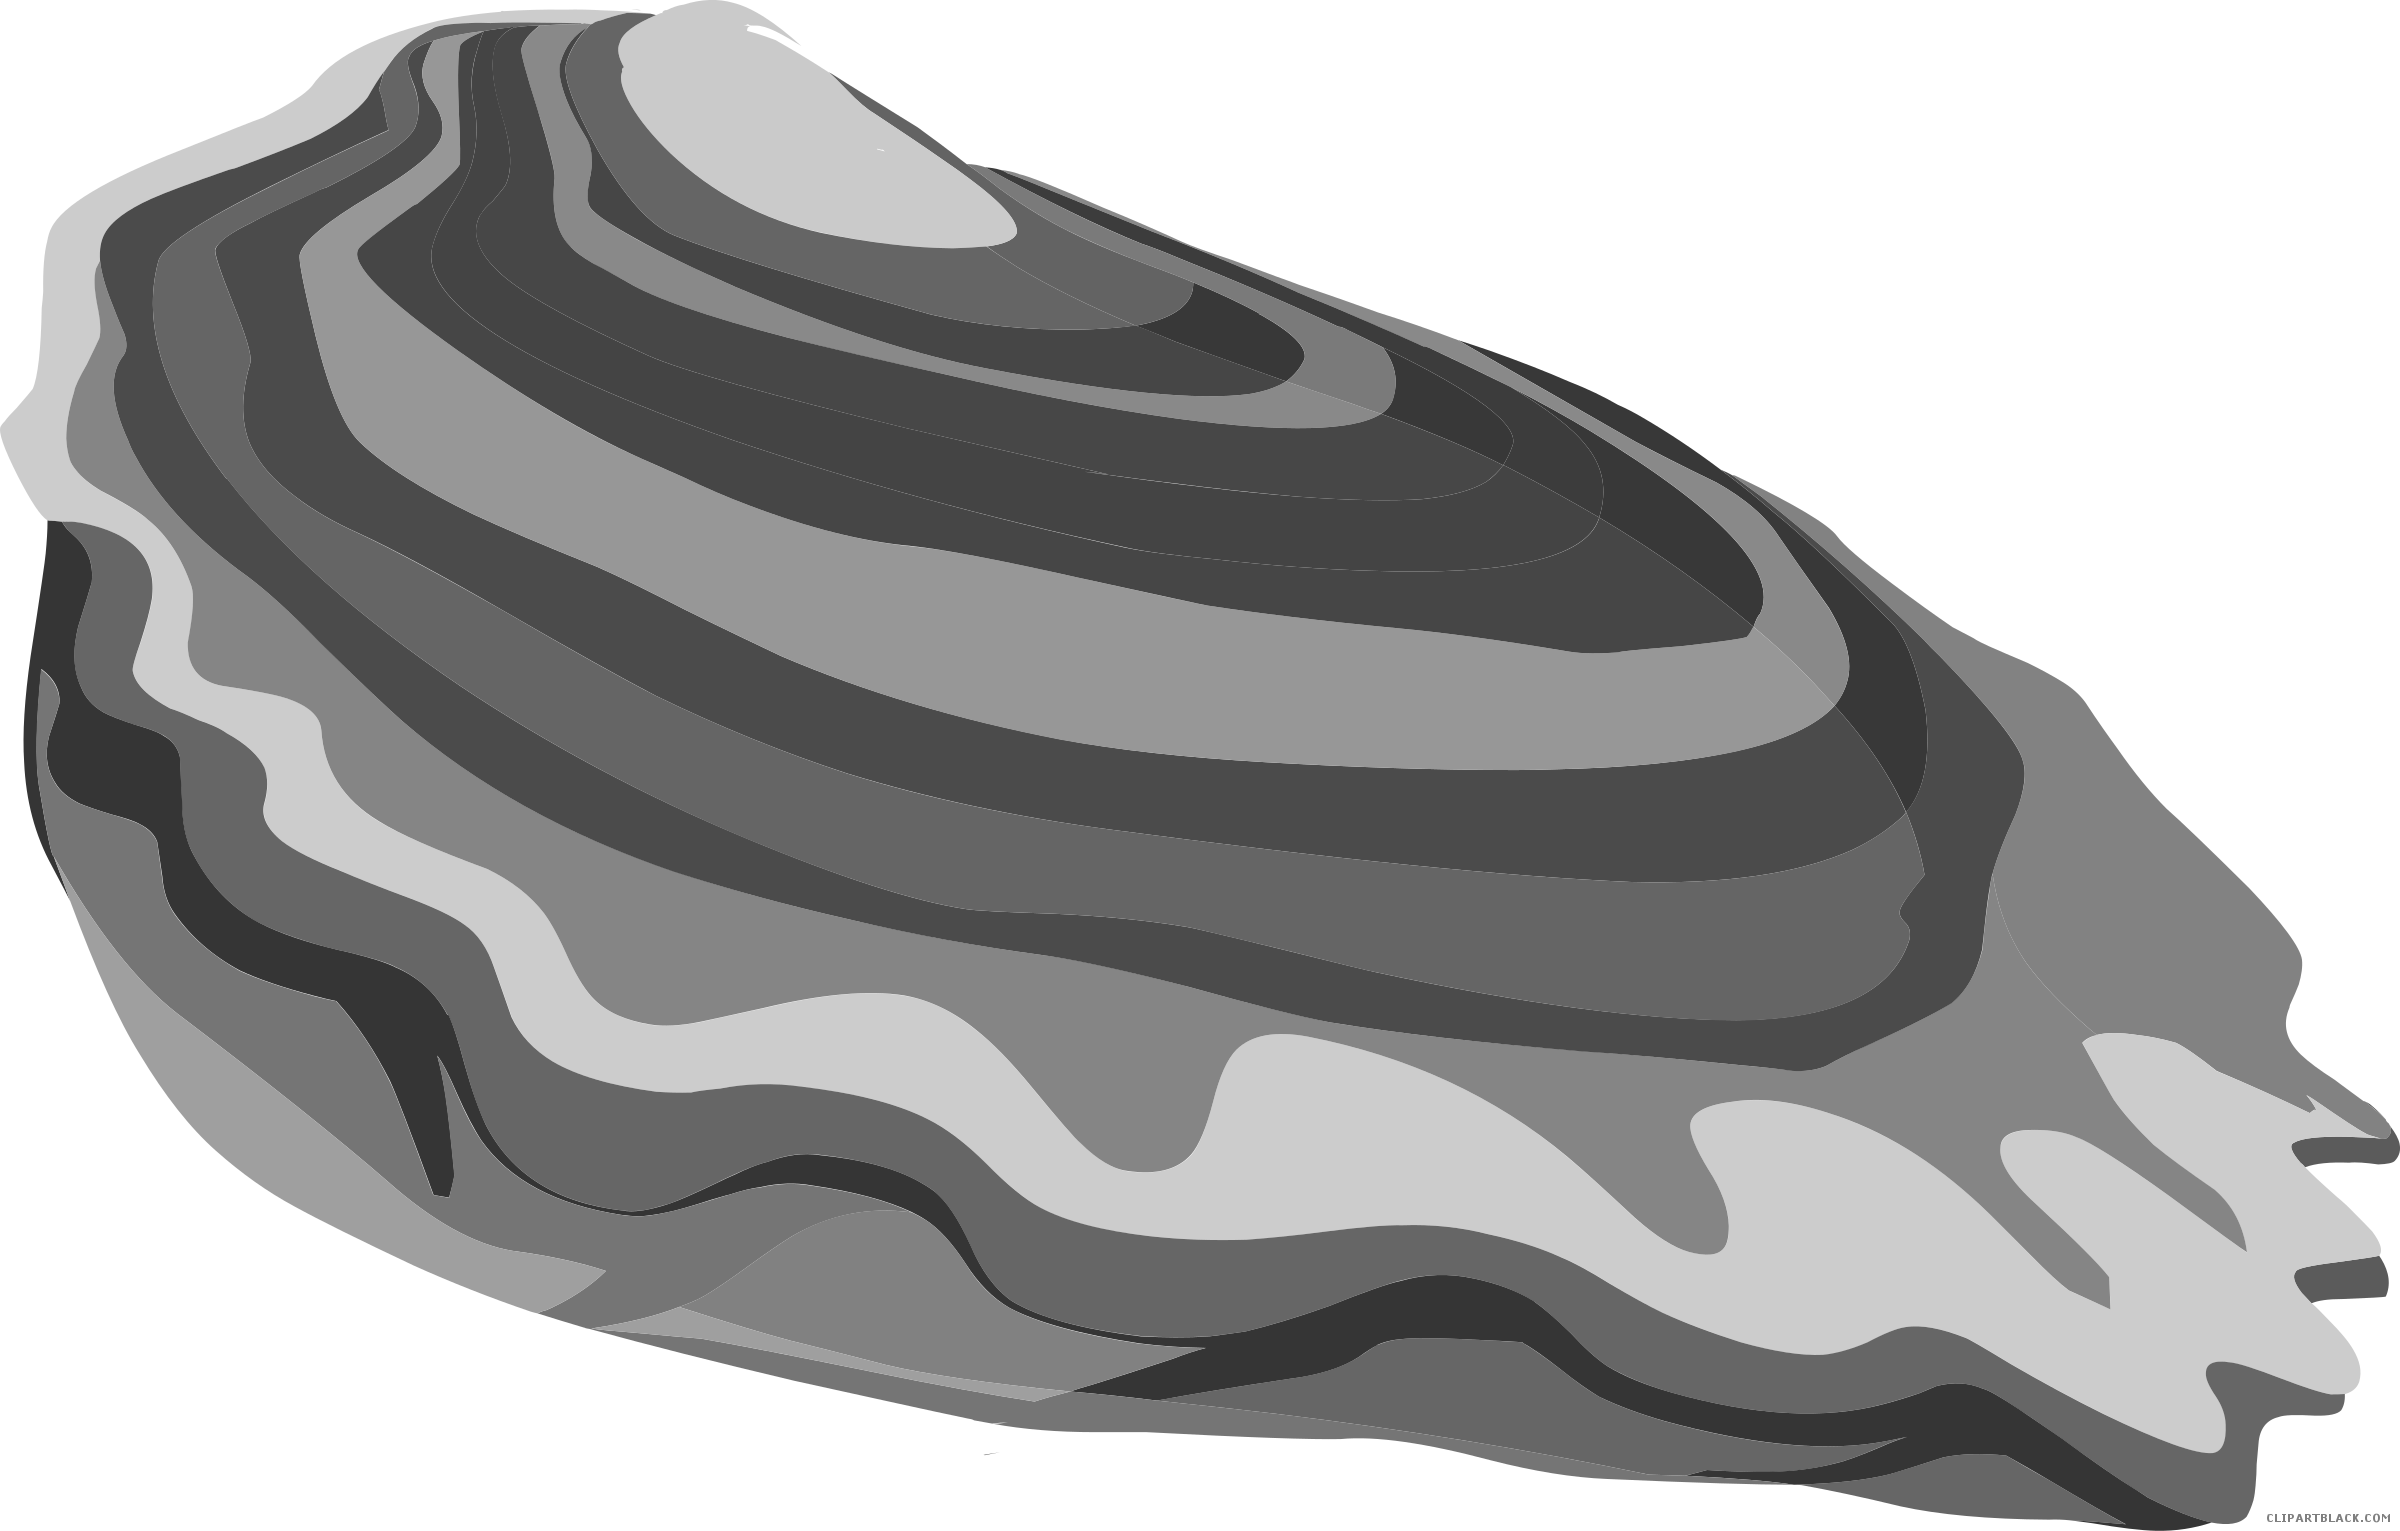 Oyster clipart oyester. Page of clipartblack com